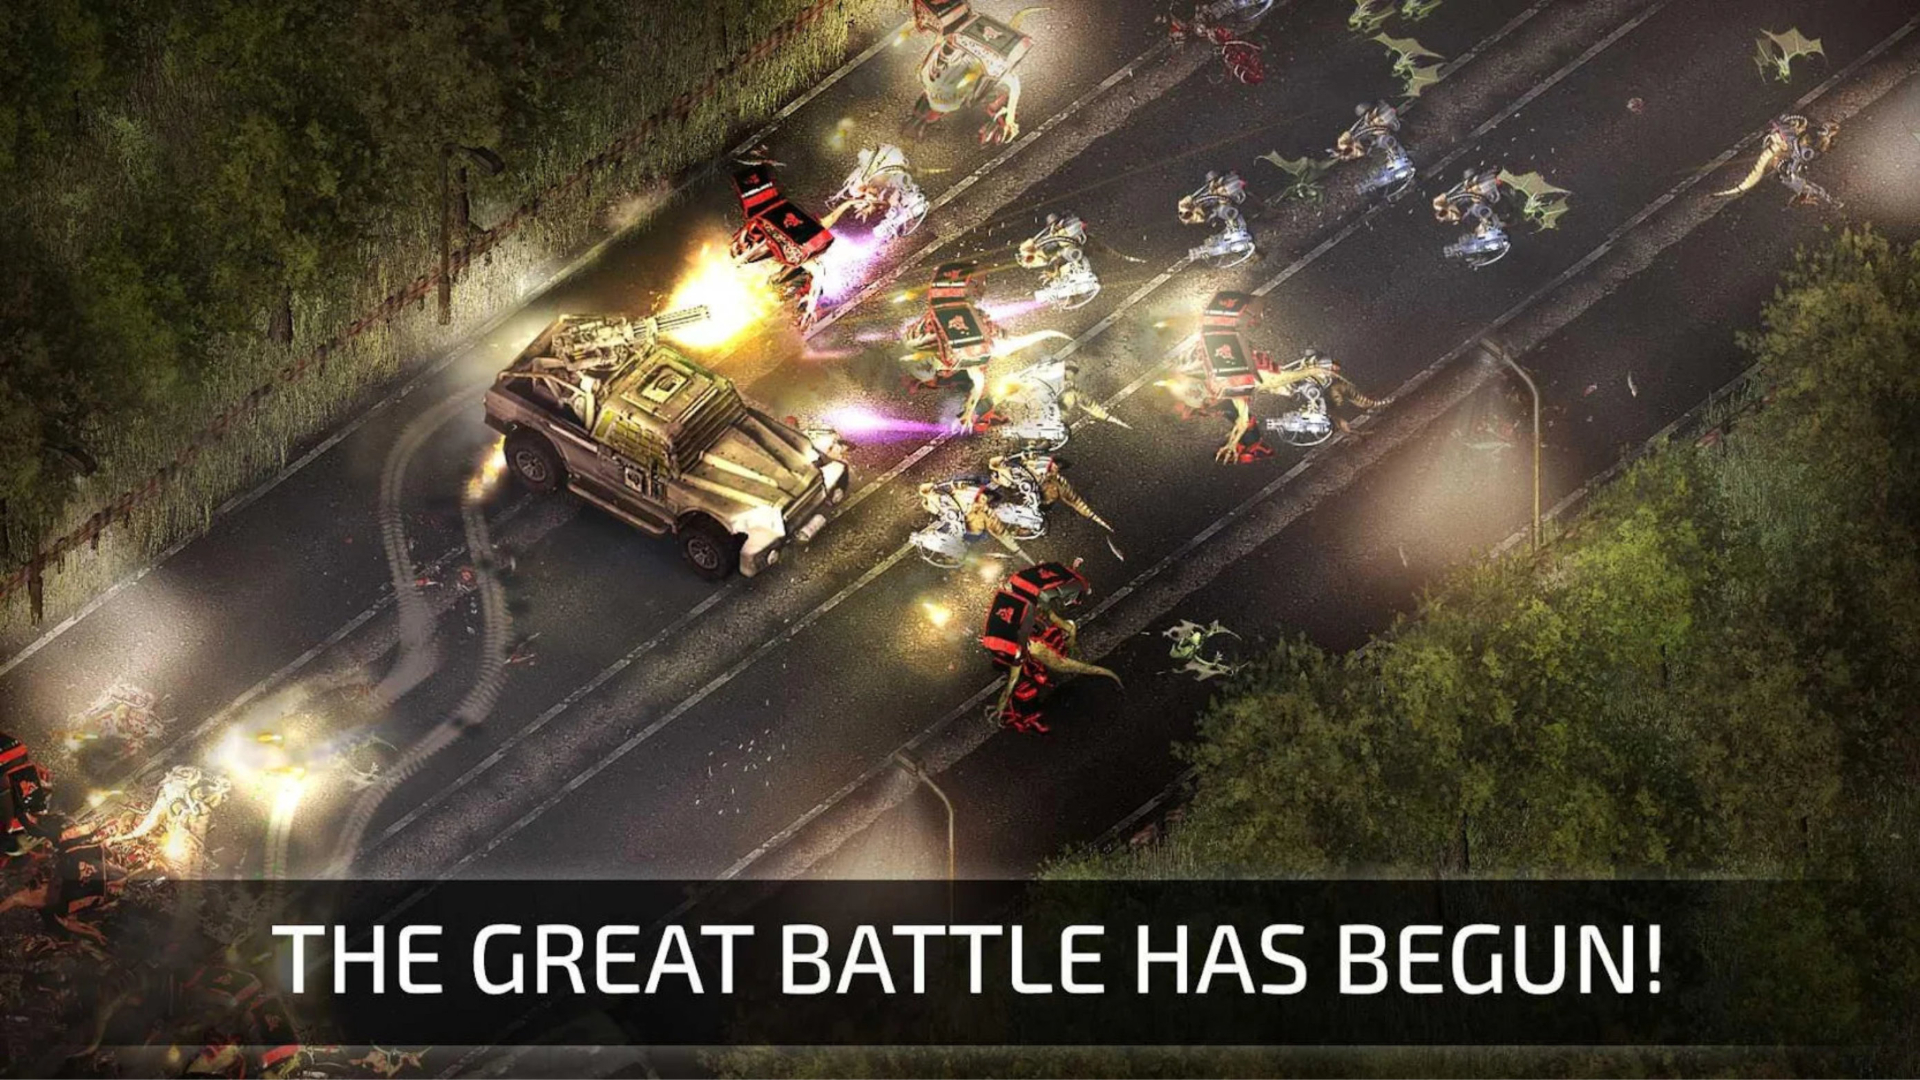 Best mobile shooters: Alien Shooter 2. Image shows a tank shooting at aliens in the street. At the bottom of the image, it says "The great battle has begun"